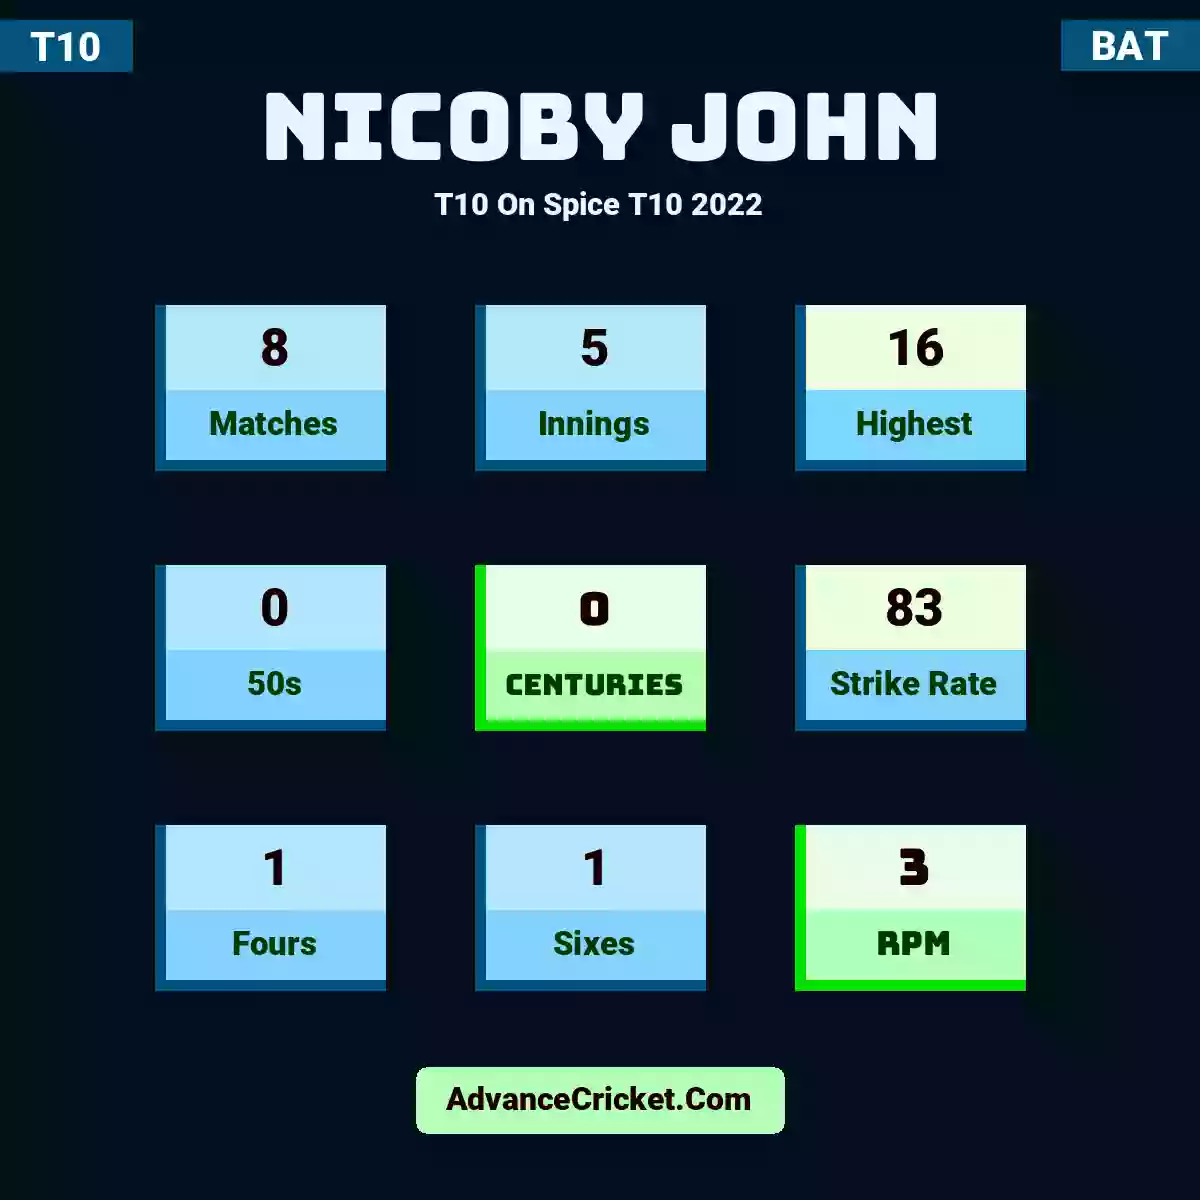 Nicoby John T10  On Spice T10 2022, Nicoby John played 8 matches, scored 16 runs as highest, 0 half-centuries, and 0 centuries, with a strike rate of 83. N.John hit 1 fours and 1 sixes, with an RPM of 3.